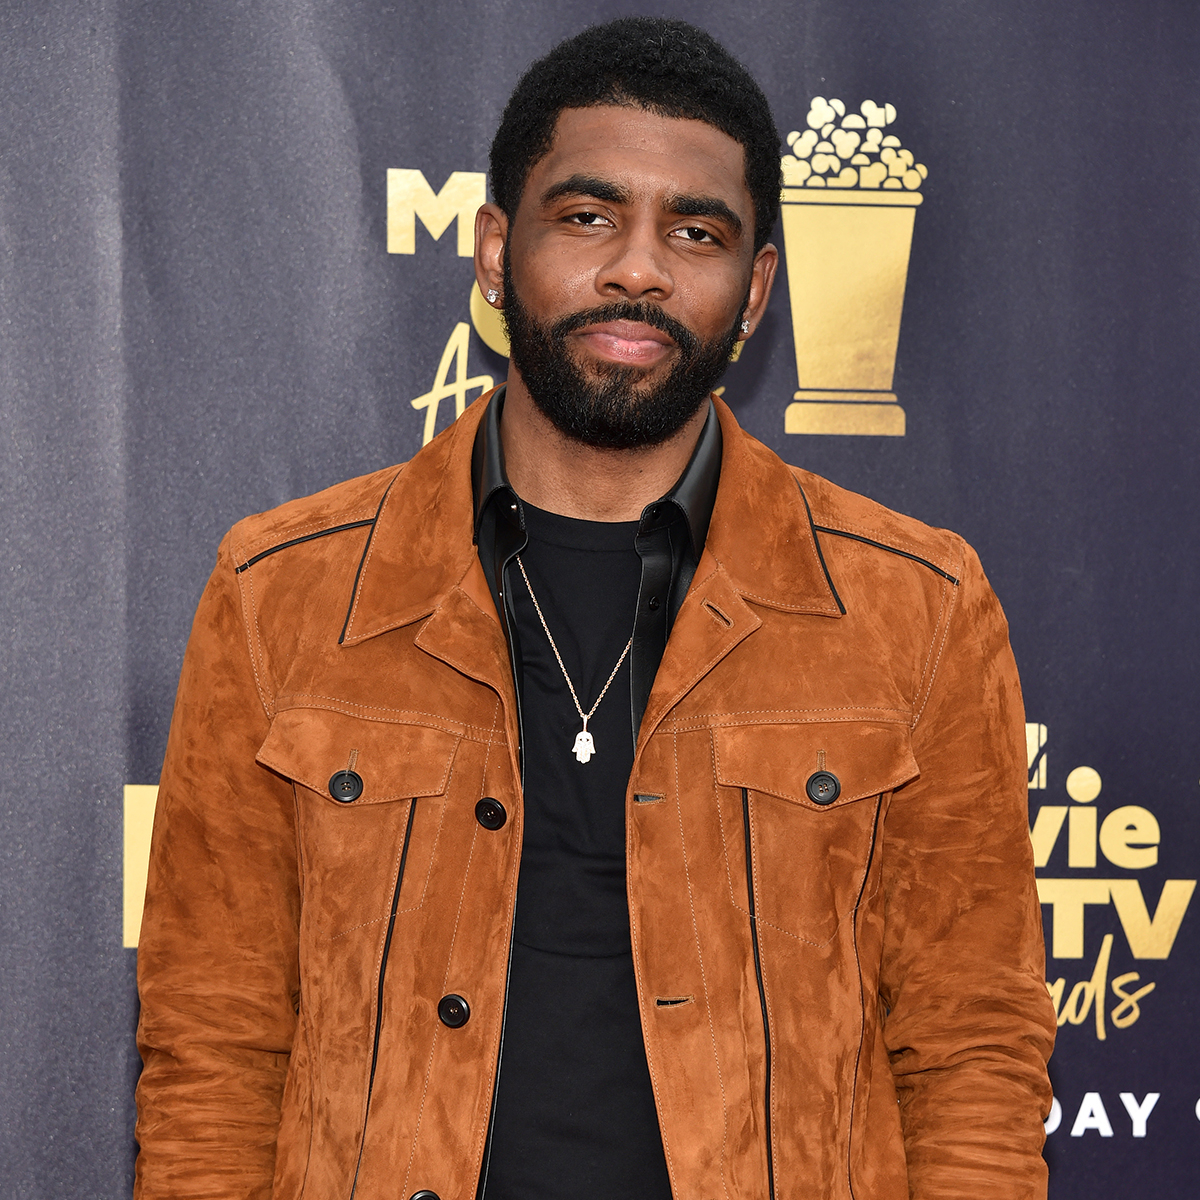 Nike Officially Ends Partnership With Kyrie Irving One Month After He Promoted Antisemitic Documentary – E! Online